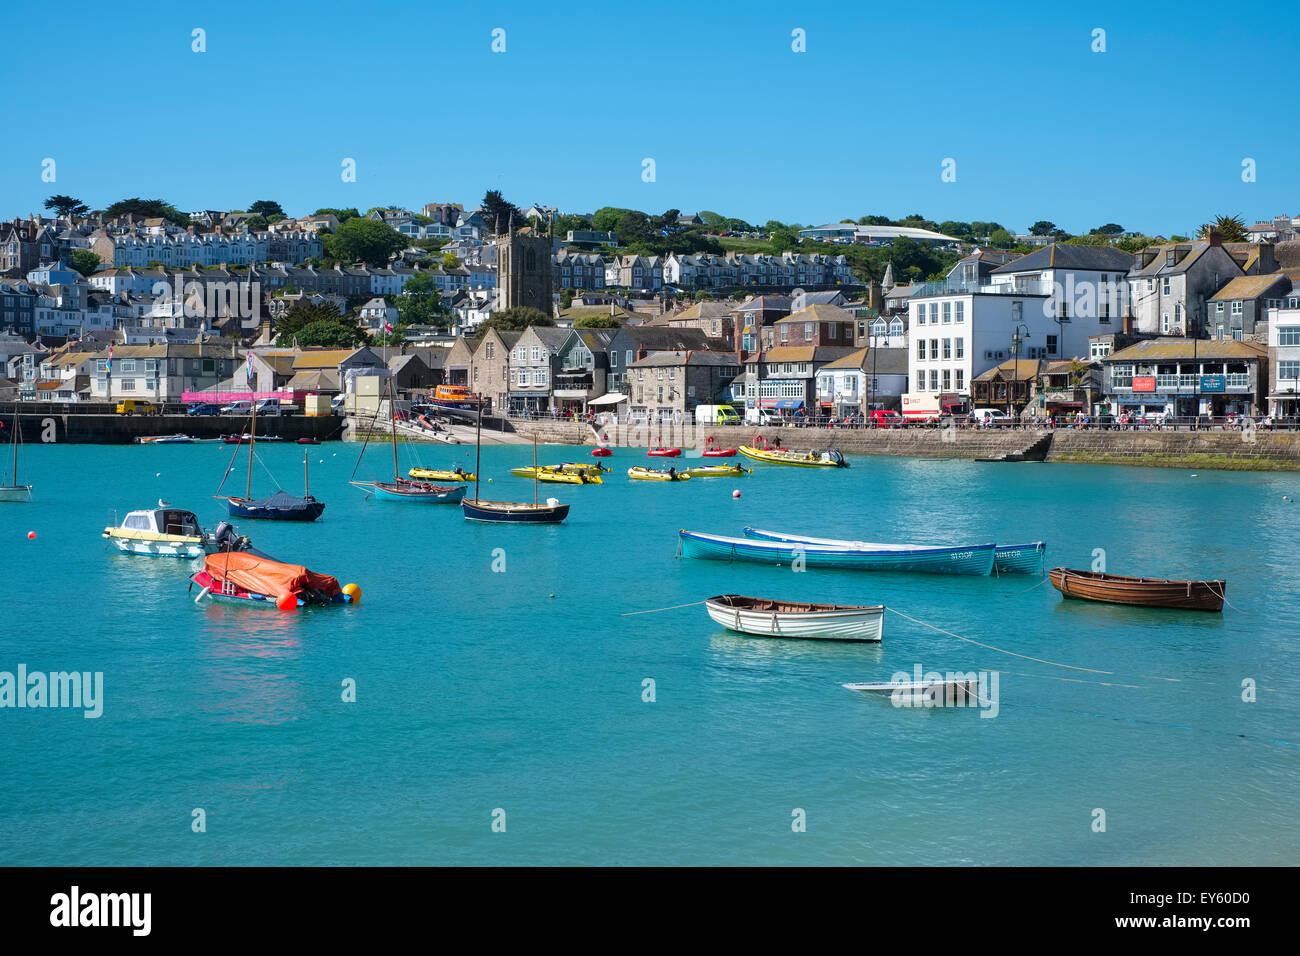 Boats moored in the harbour at St Ives, Cornwall, England, UK Stock Photo